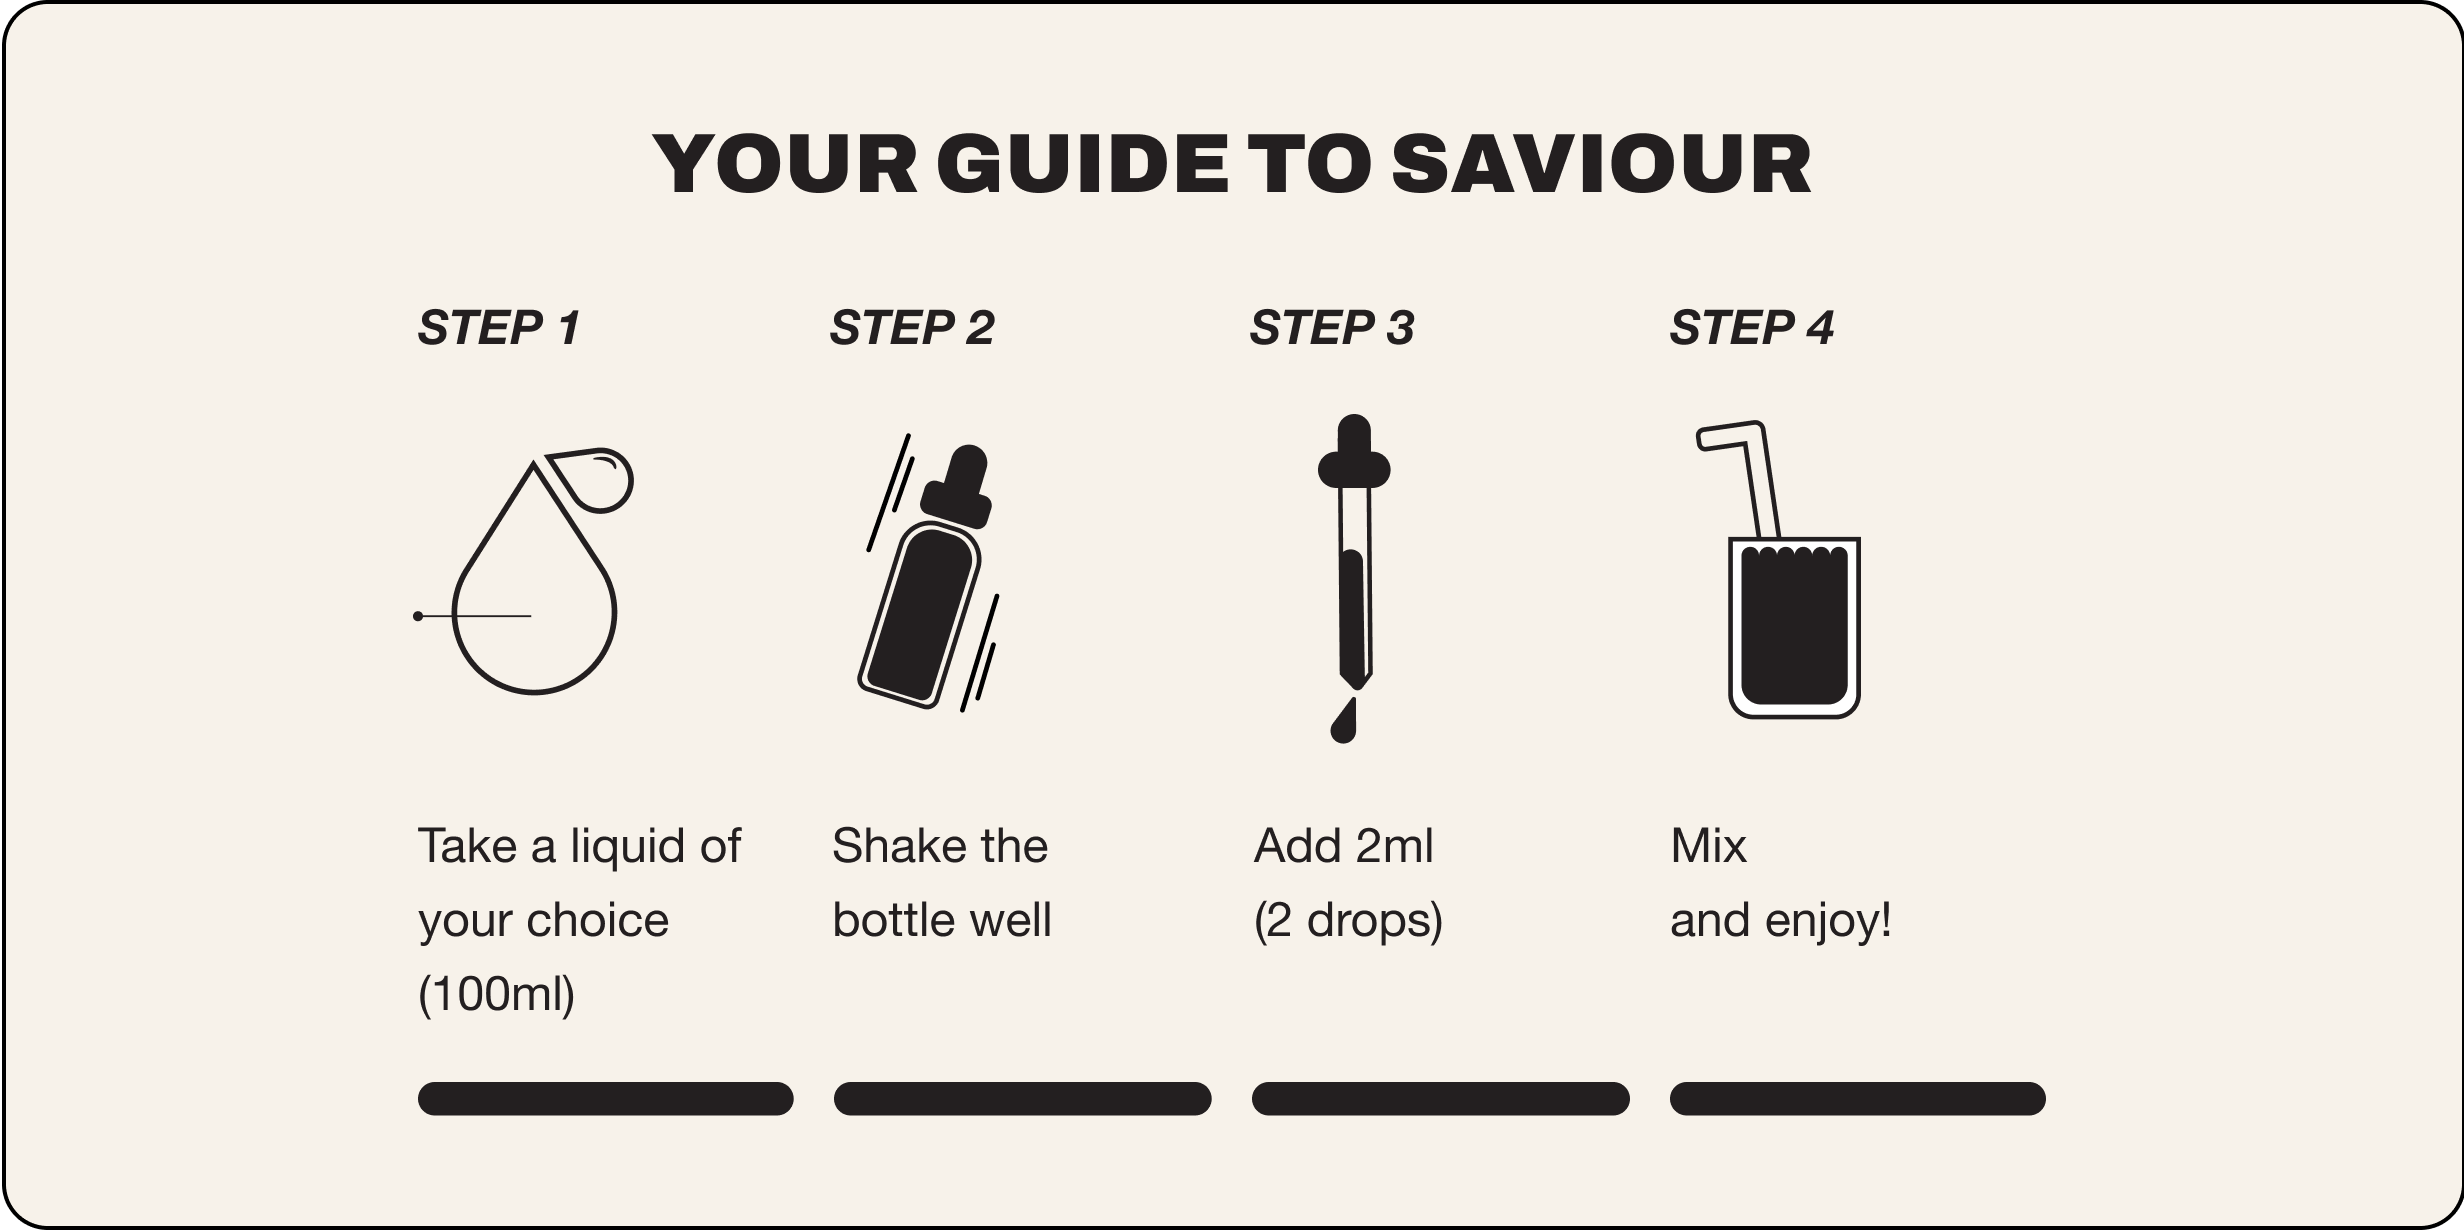 Your guide to saviour. Step 1 take a liquid of your choice 100ml, step 2 shake the bottle well, step 3 add 2ml (2 drops), step 4 mix and enjoy!